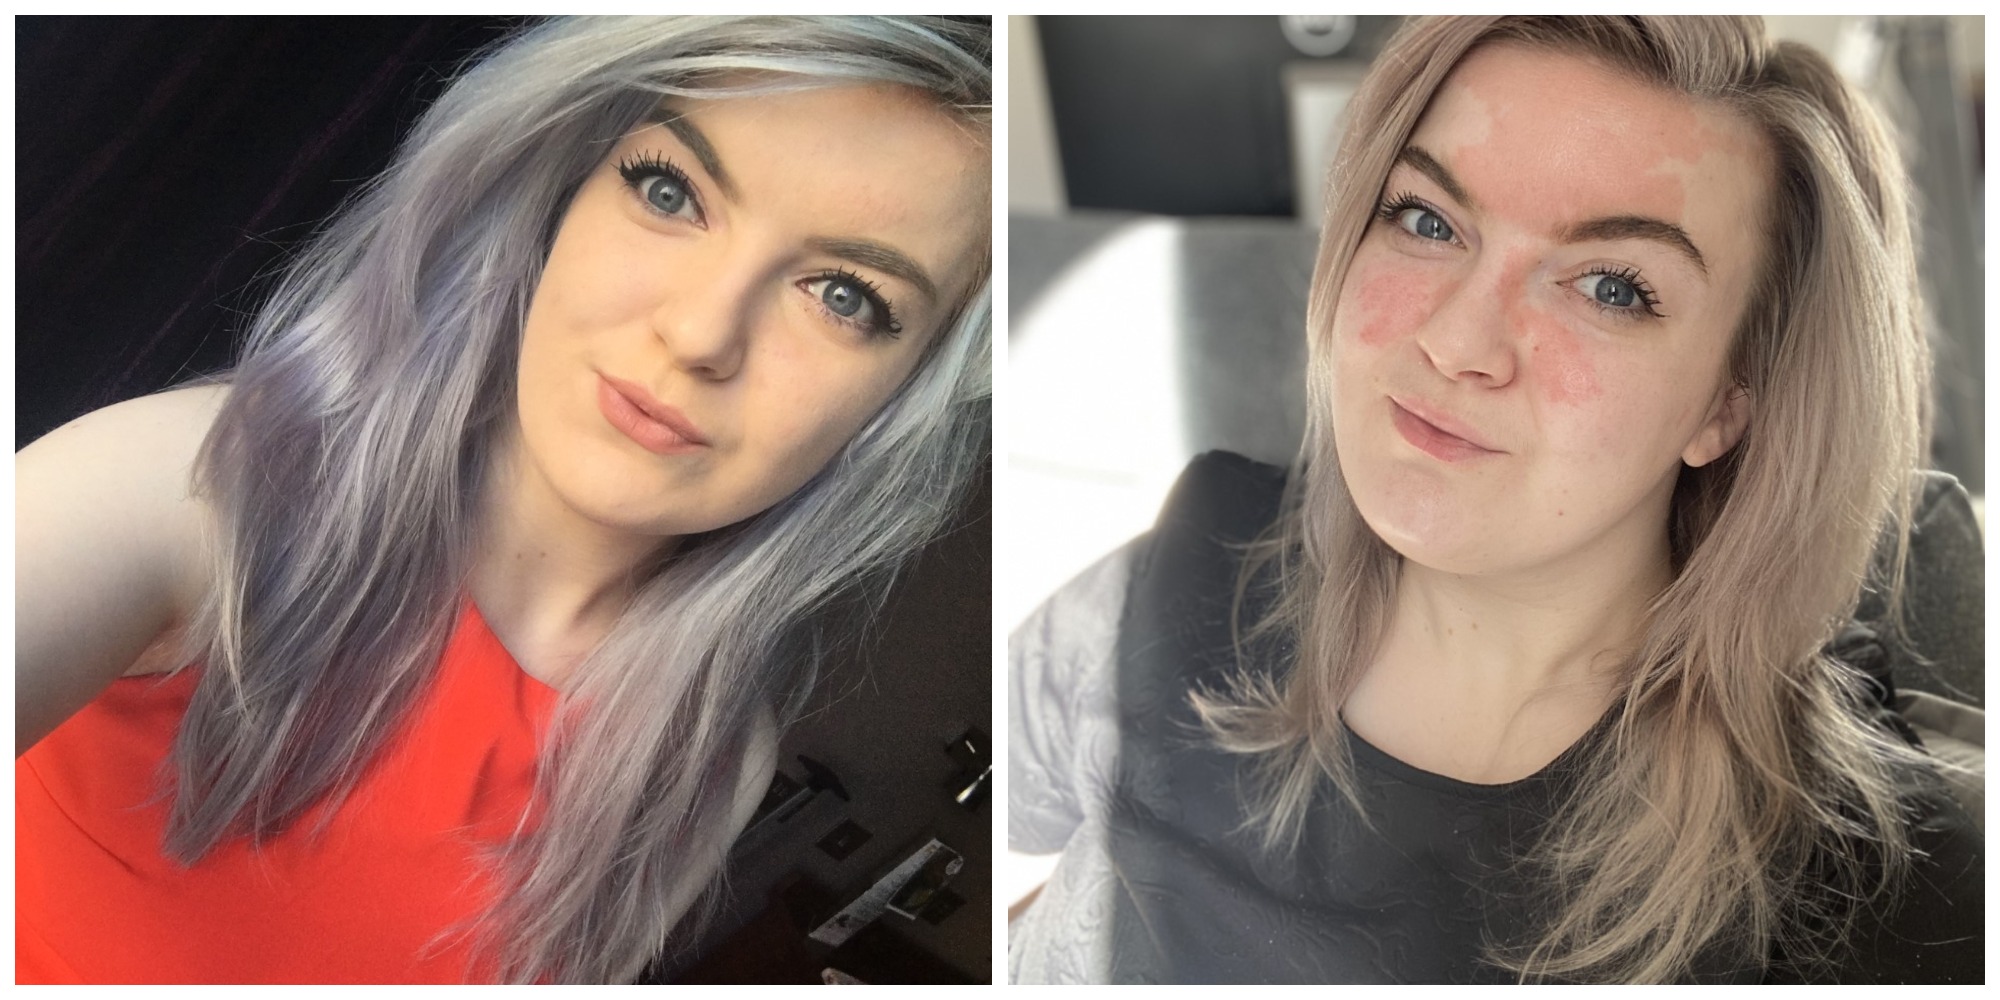 Two photos show a young woman who has psoriasis on her face, wearing a red top in one photo, black in the other.